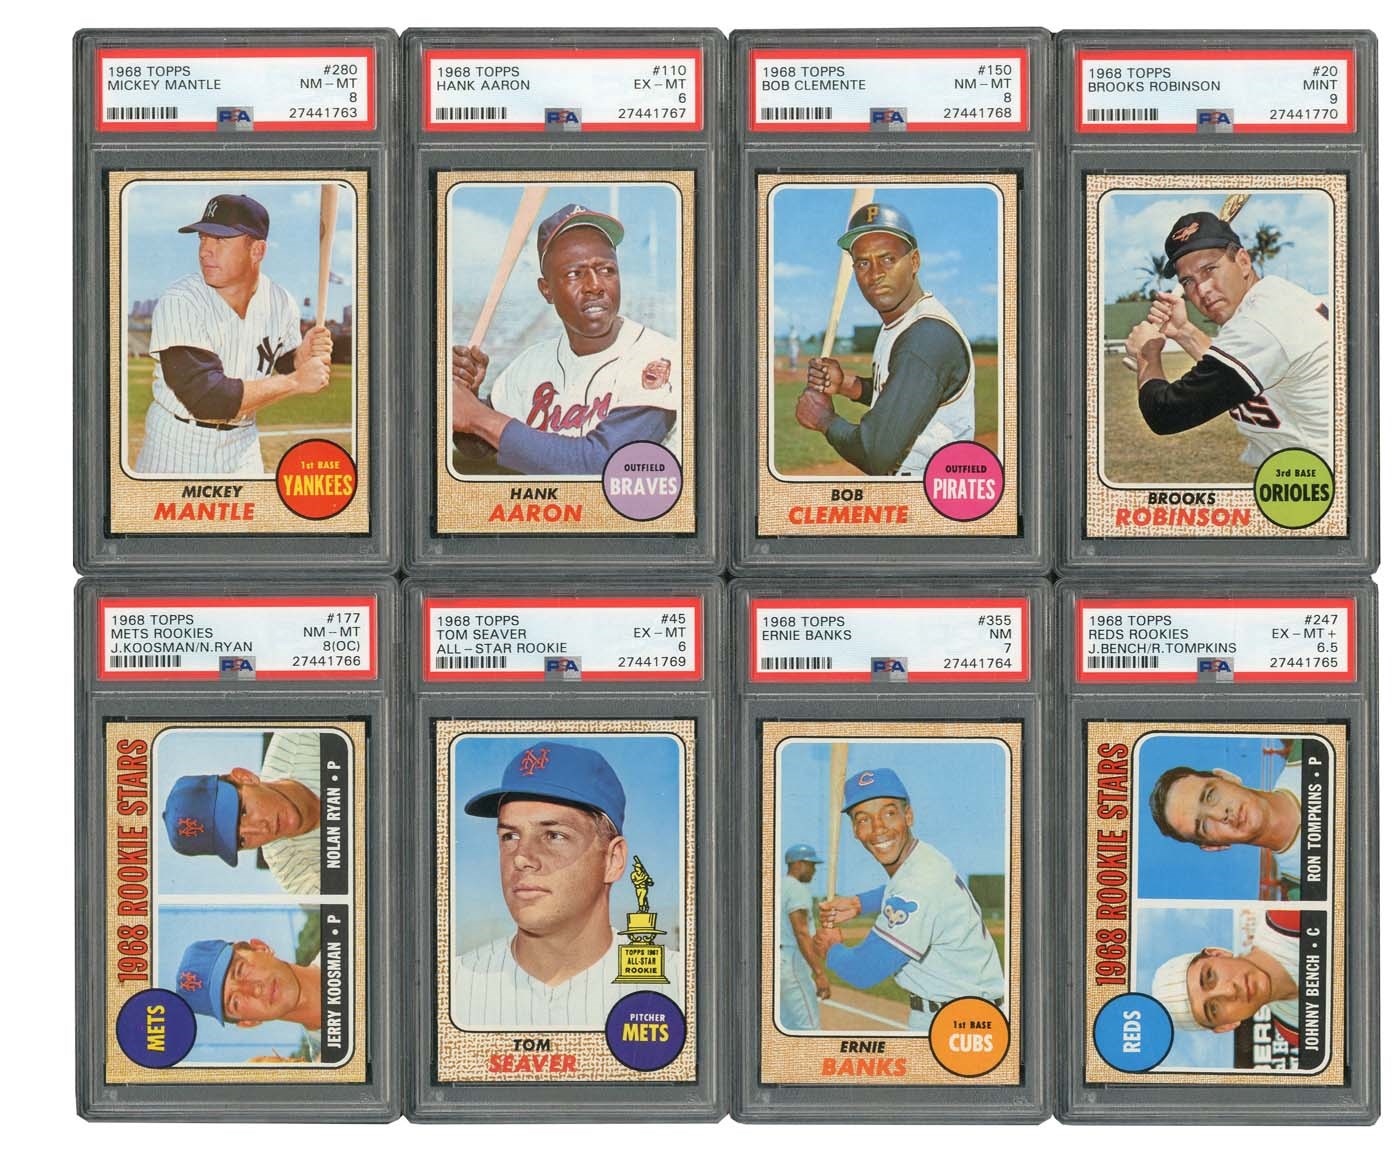 1968 Topps HIGH GRADE Complete Set of 598 Cards with (6) PSA Graded